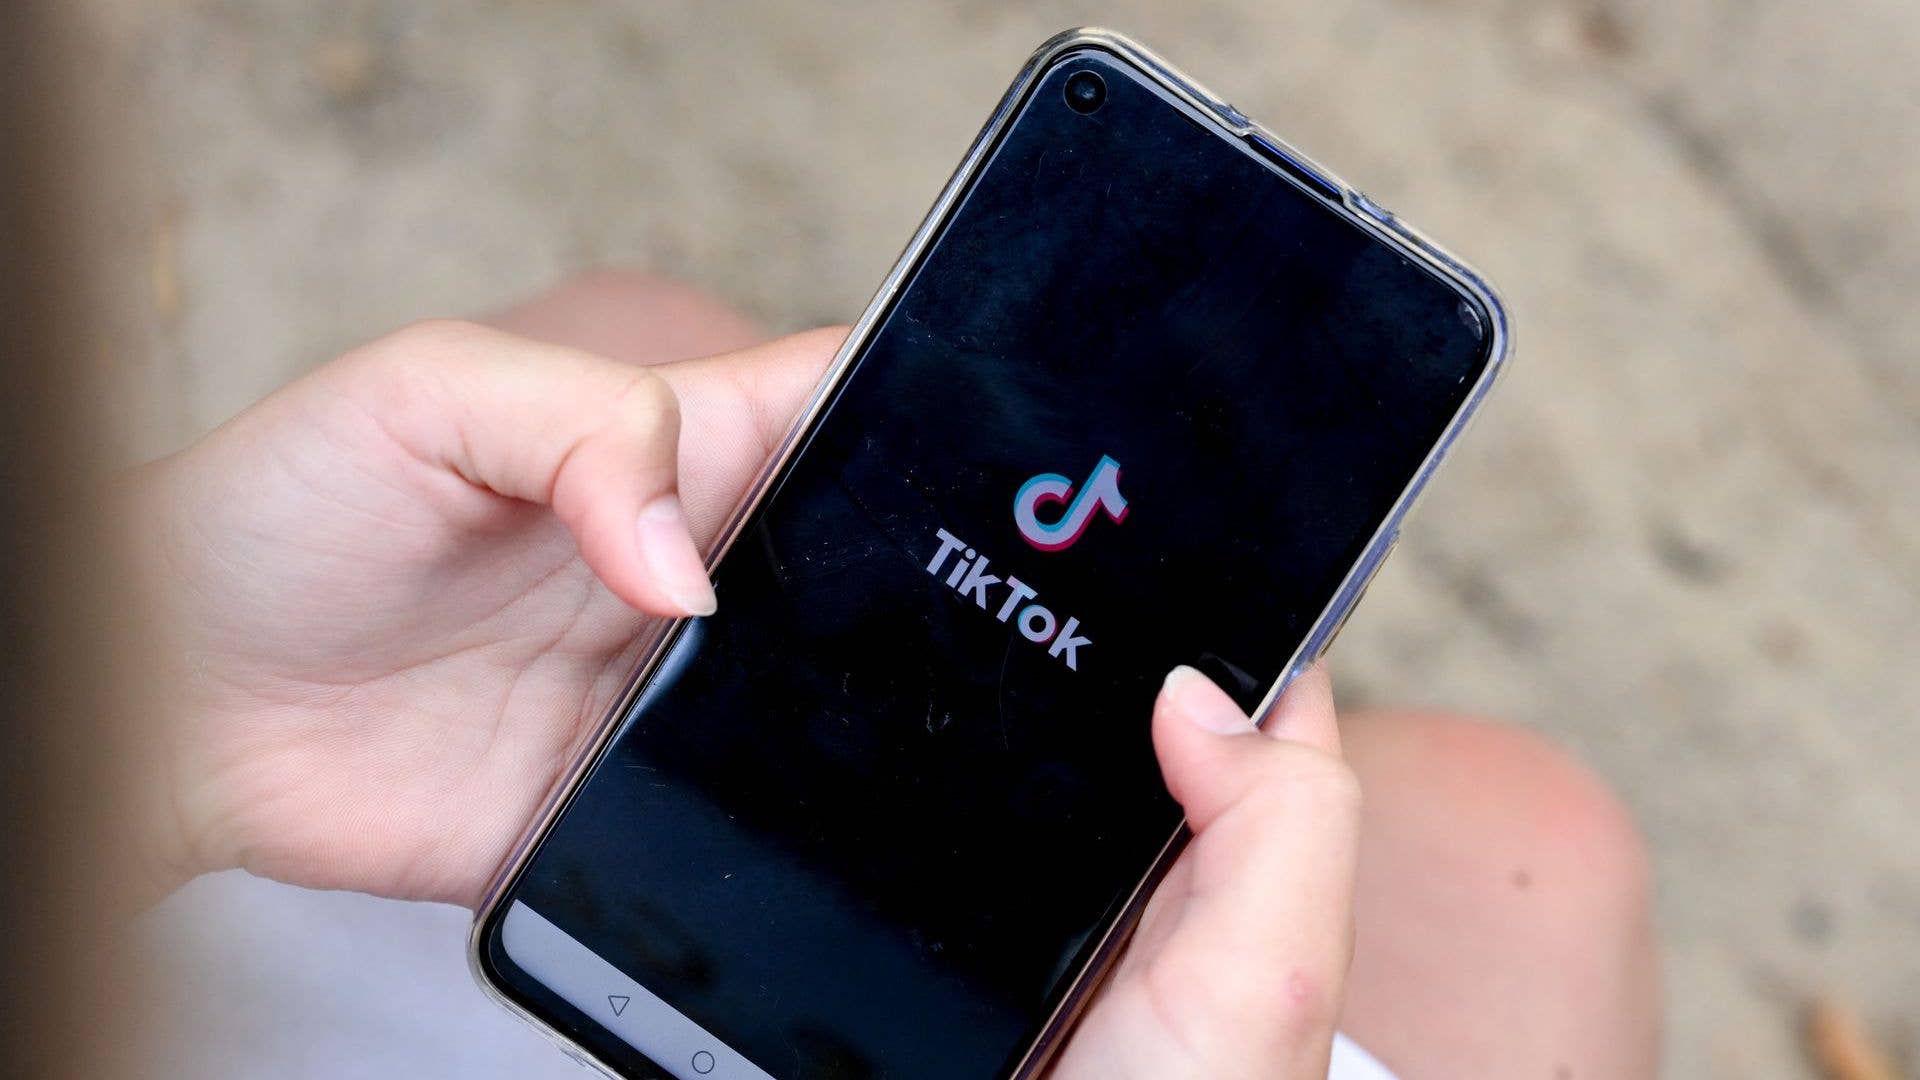 A girl is holding a smartphone in her hands with the logo of the short video app TikTok on it.